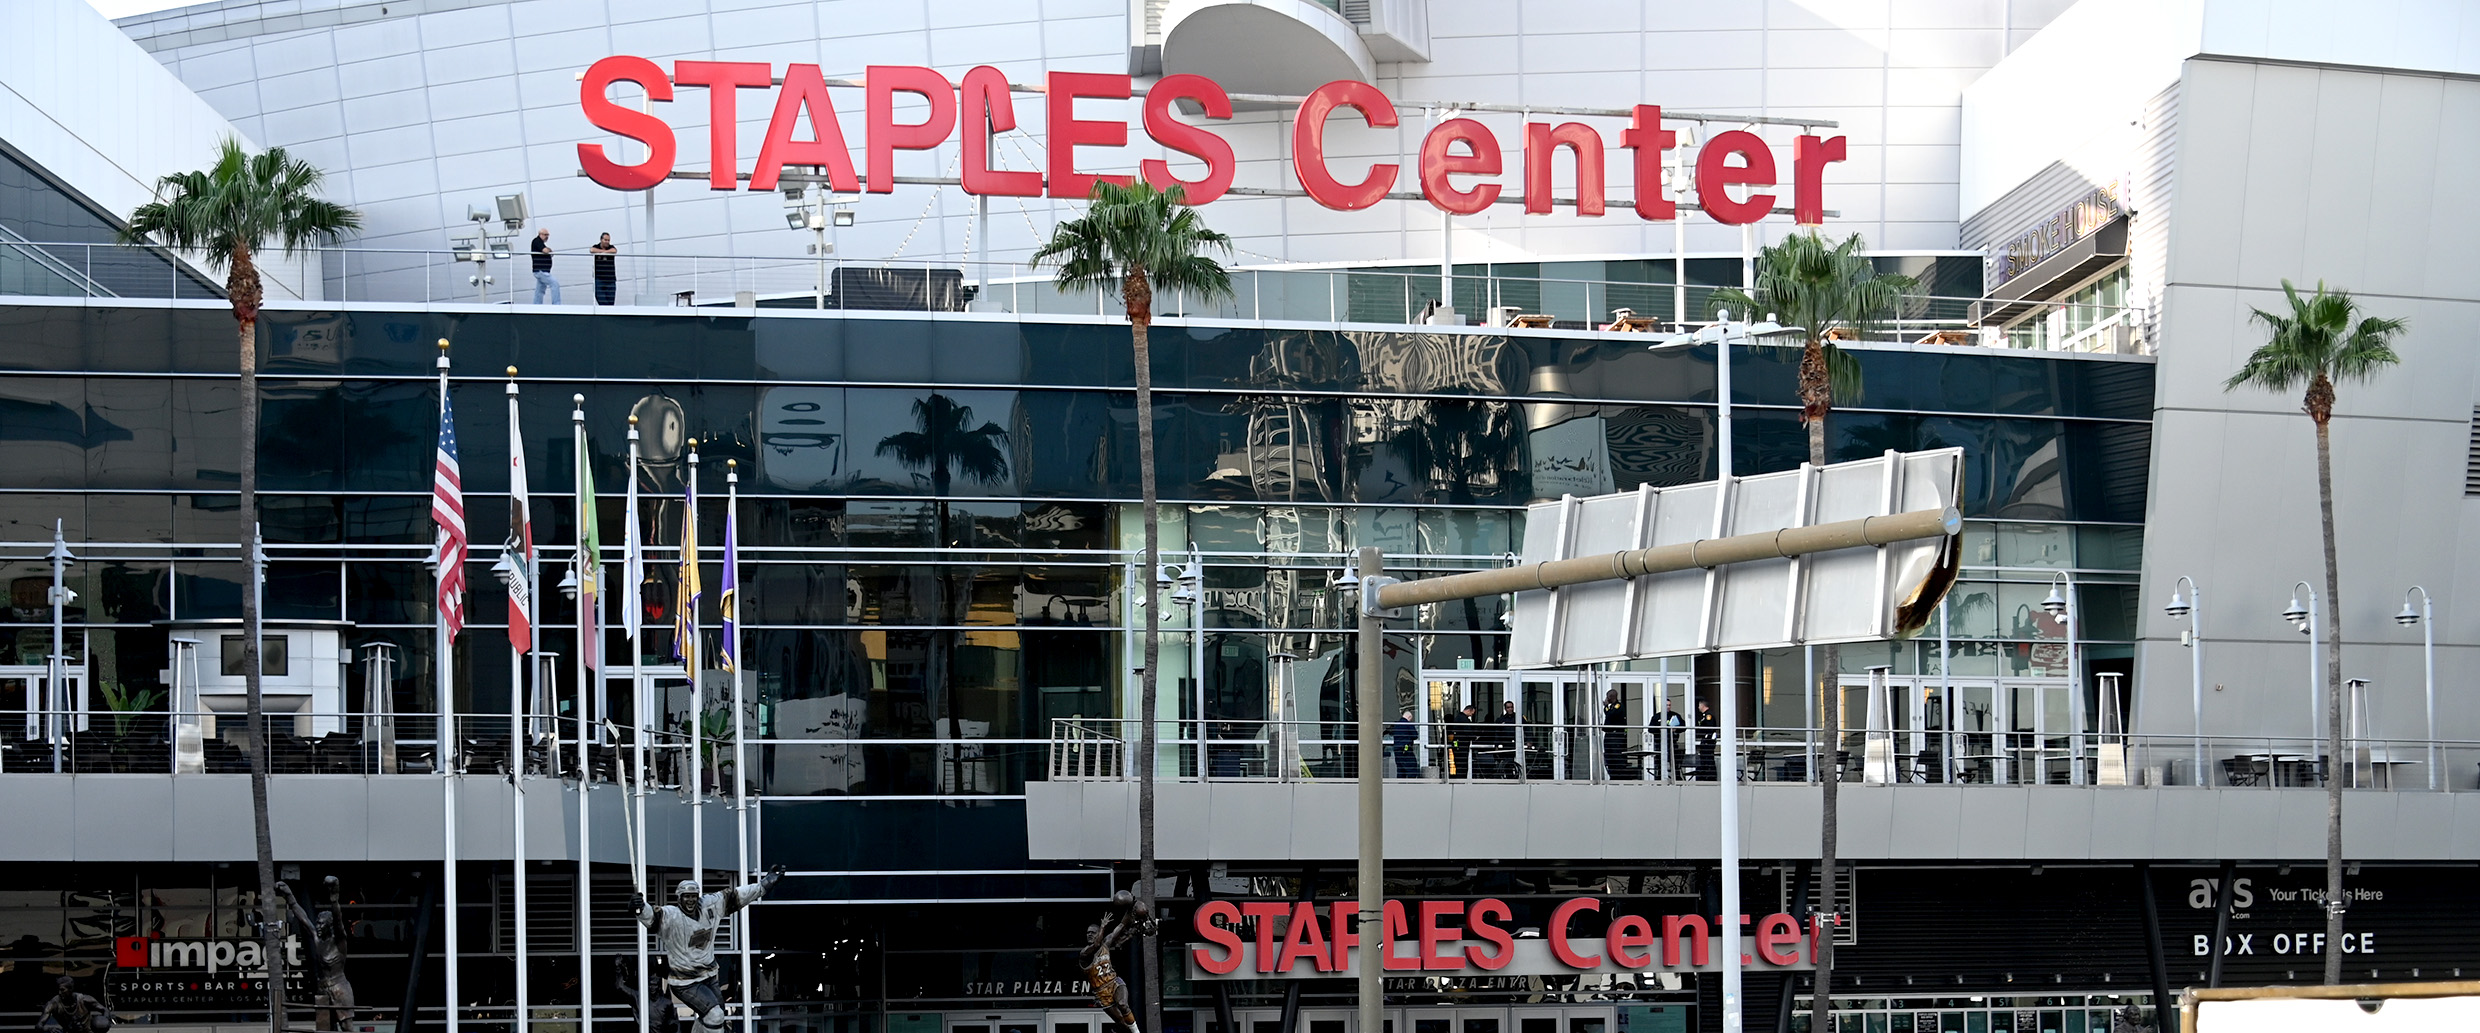 Staples Center is no more!